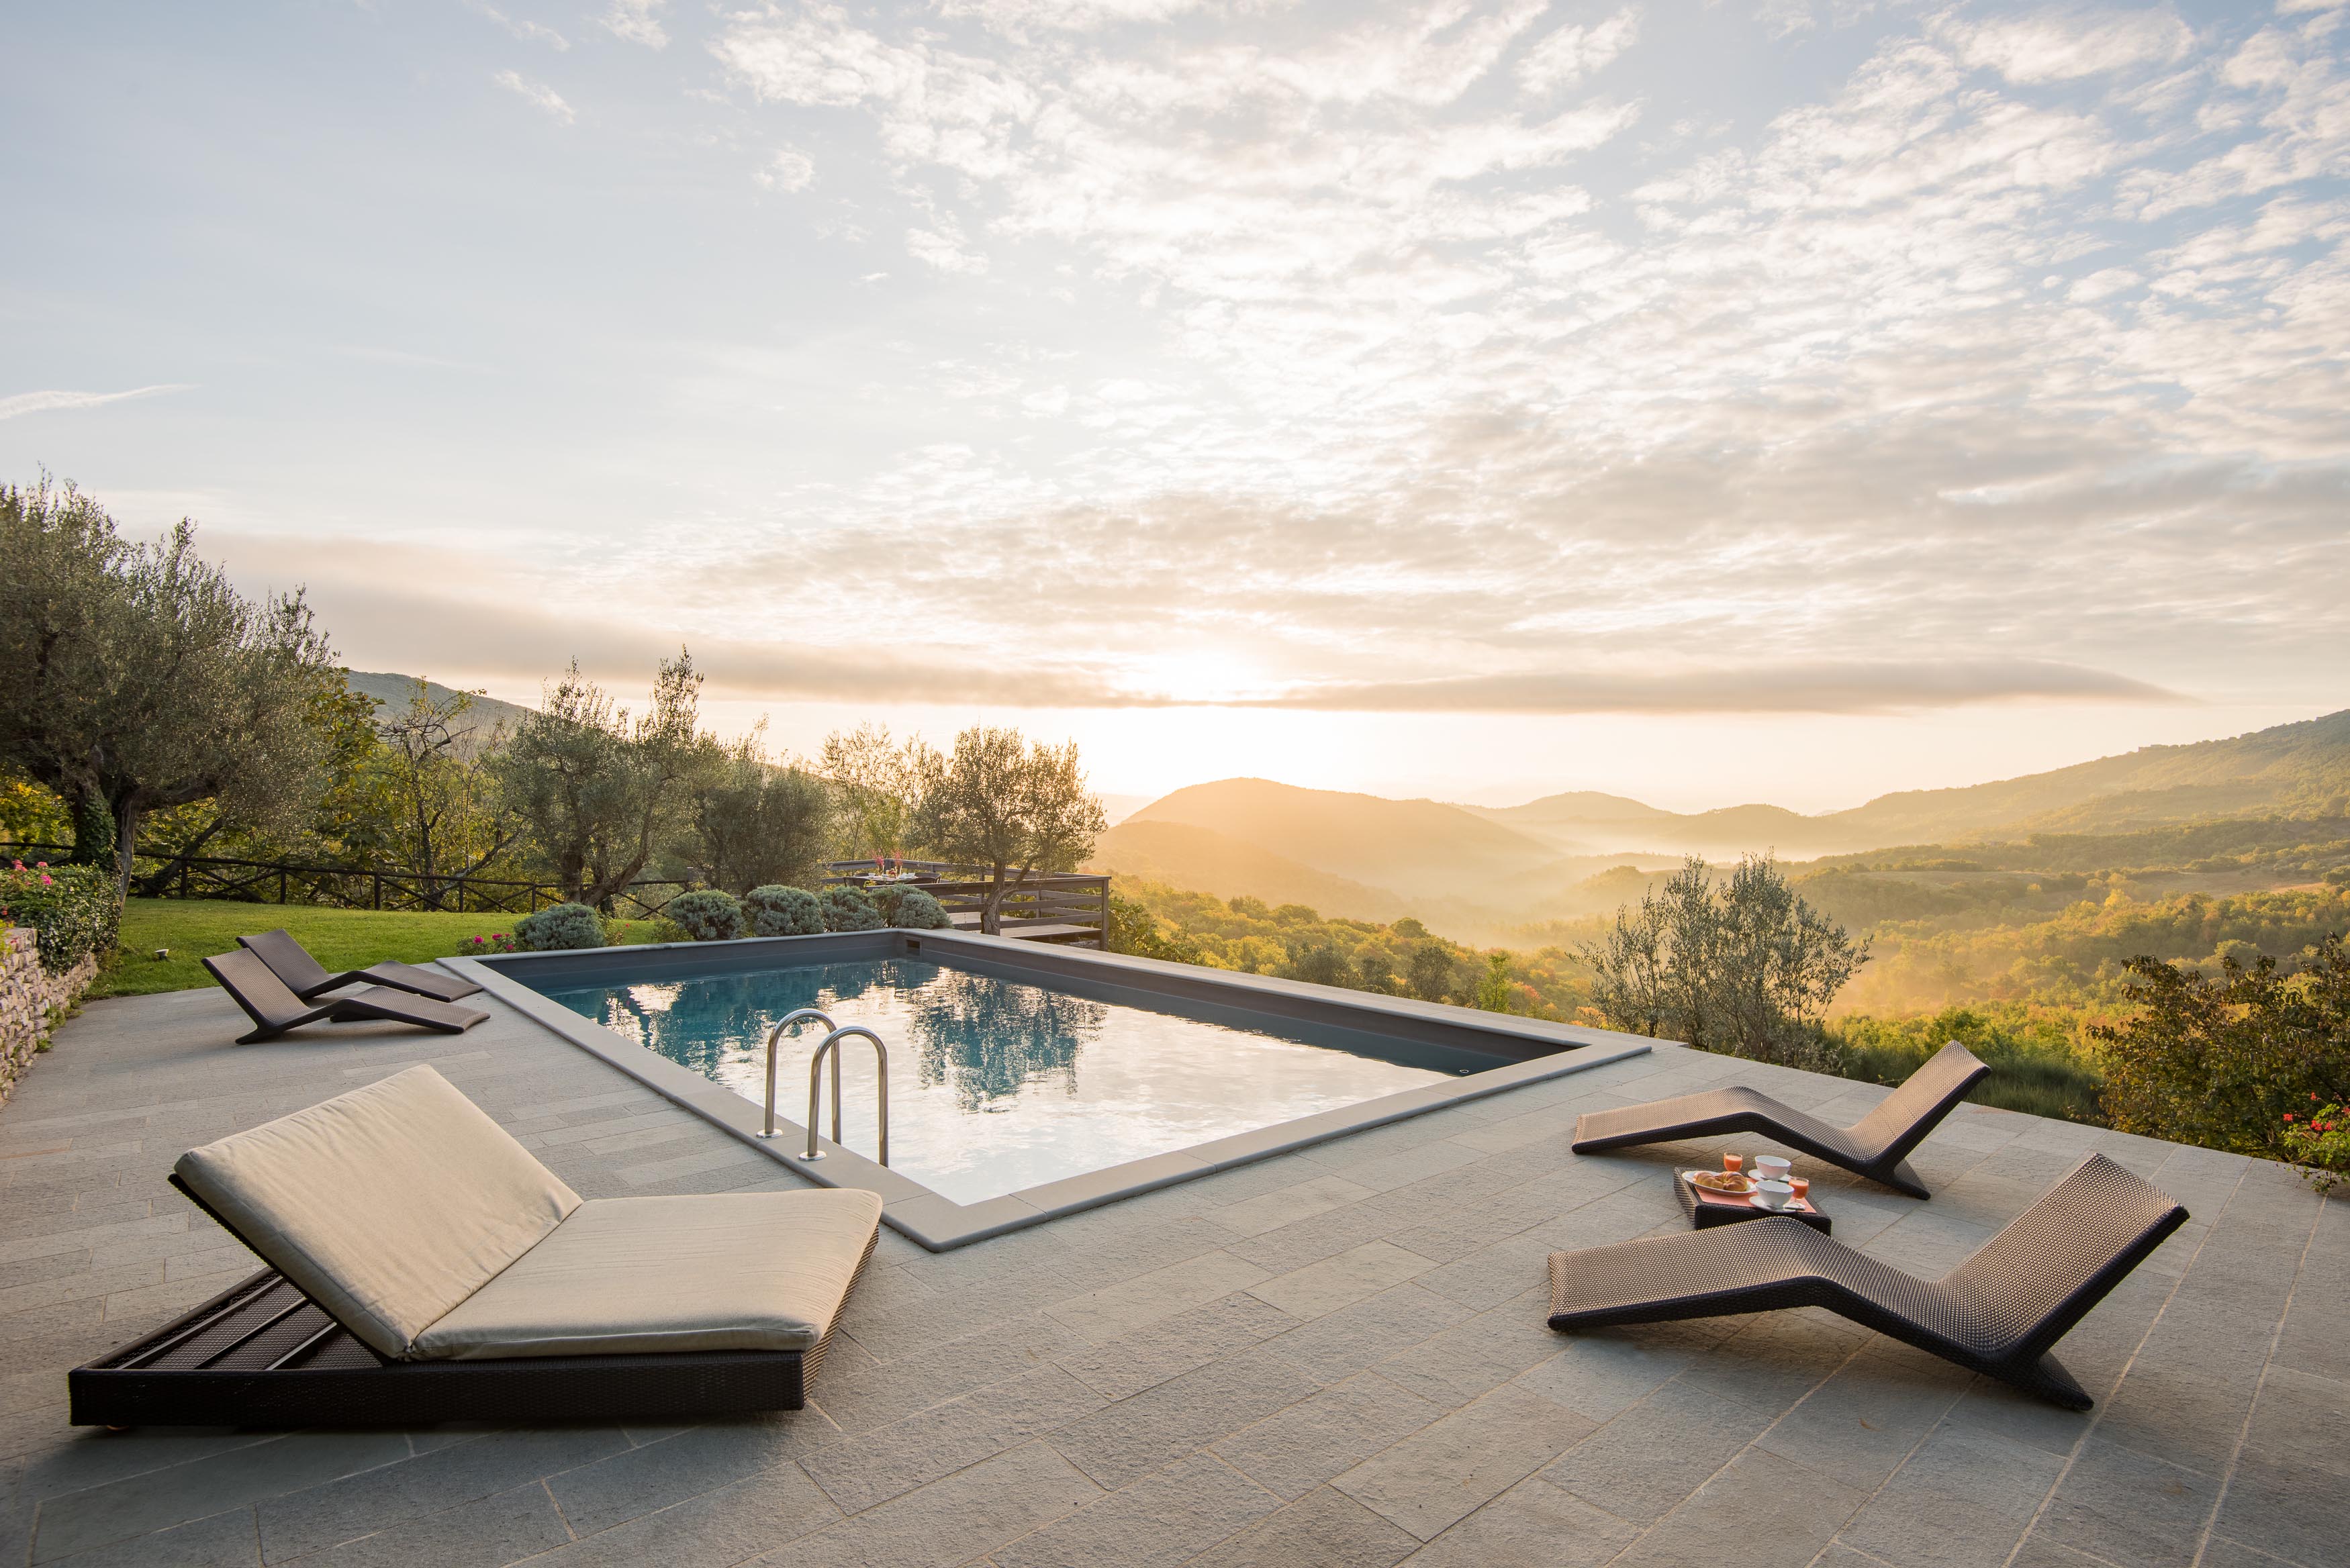 Pool area with patio, sun loungers, food, drink, grass & view of balcony and countryside at Villa Pizzicato in Umbria, Italy